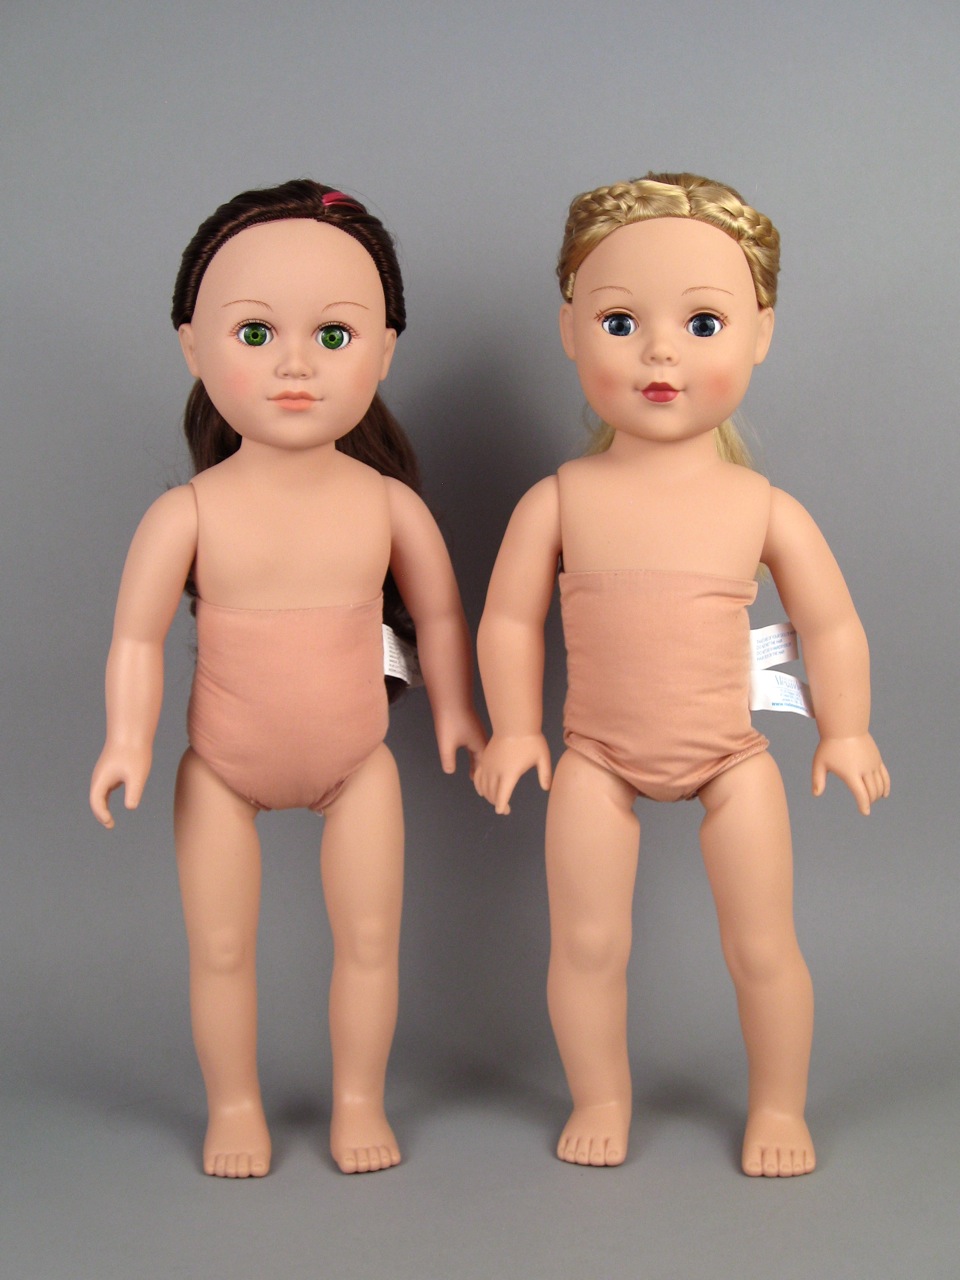 What is the difference between the Newberry dolls and the American Girl dolls?